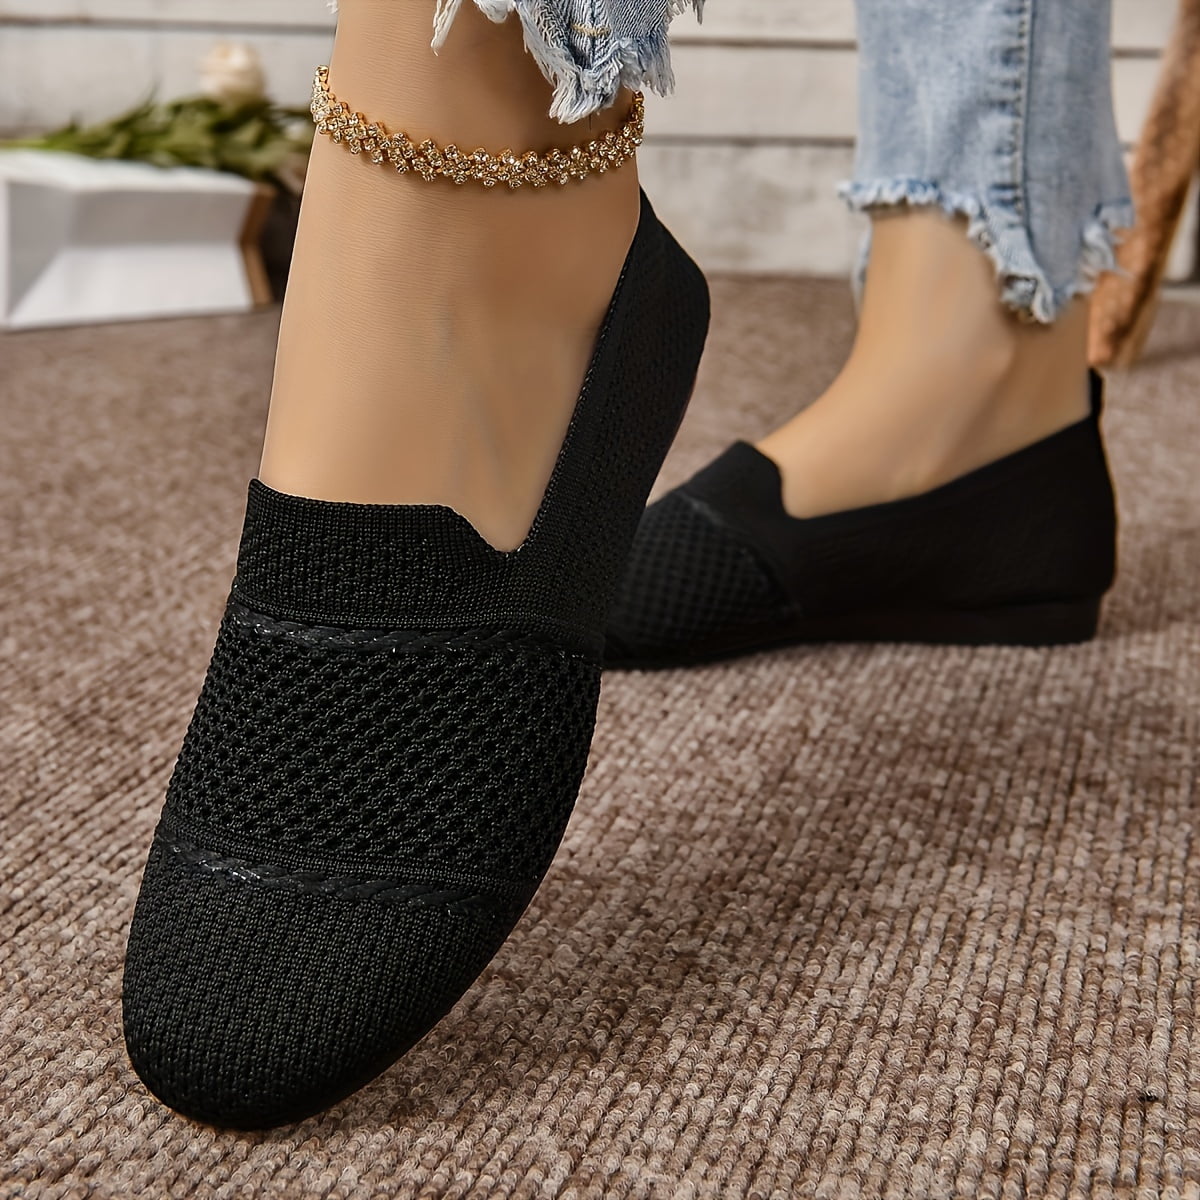 Women's Lightweight & Comfortable Shoes, Breathable Knit Flat Shoes ...